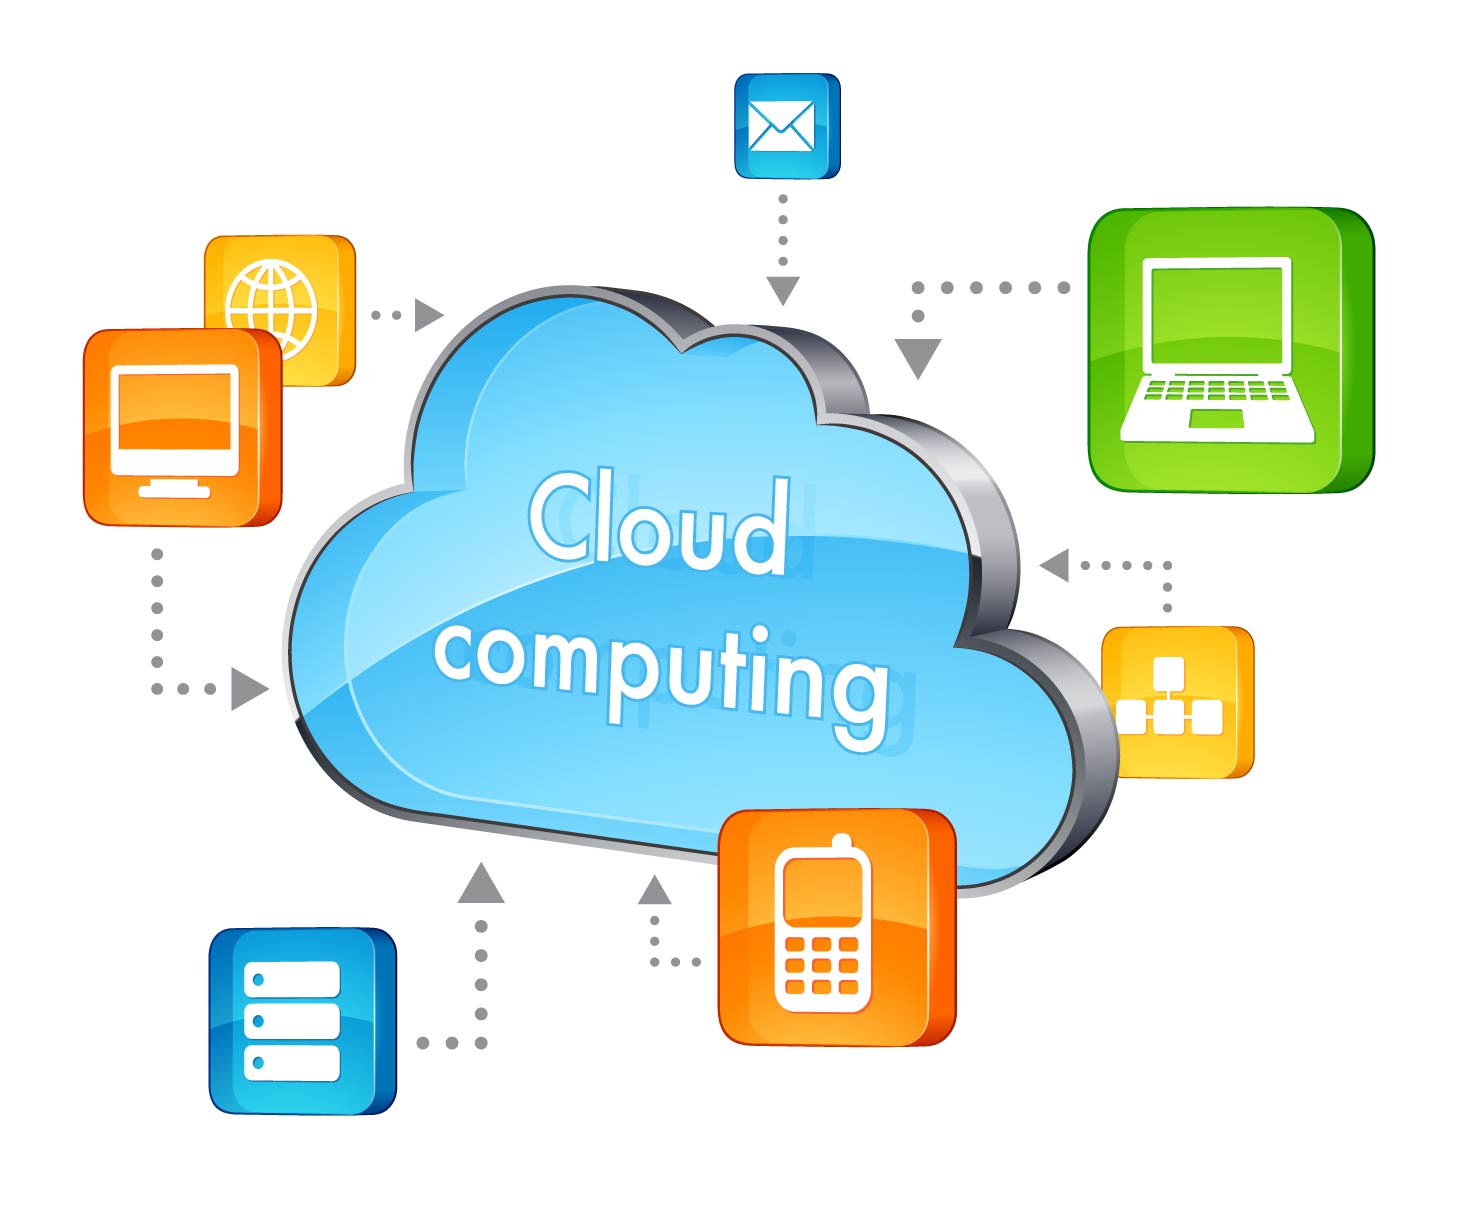 Cloud Computing Drawing With Communication Icons Free Image Download